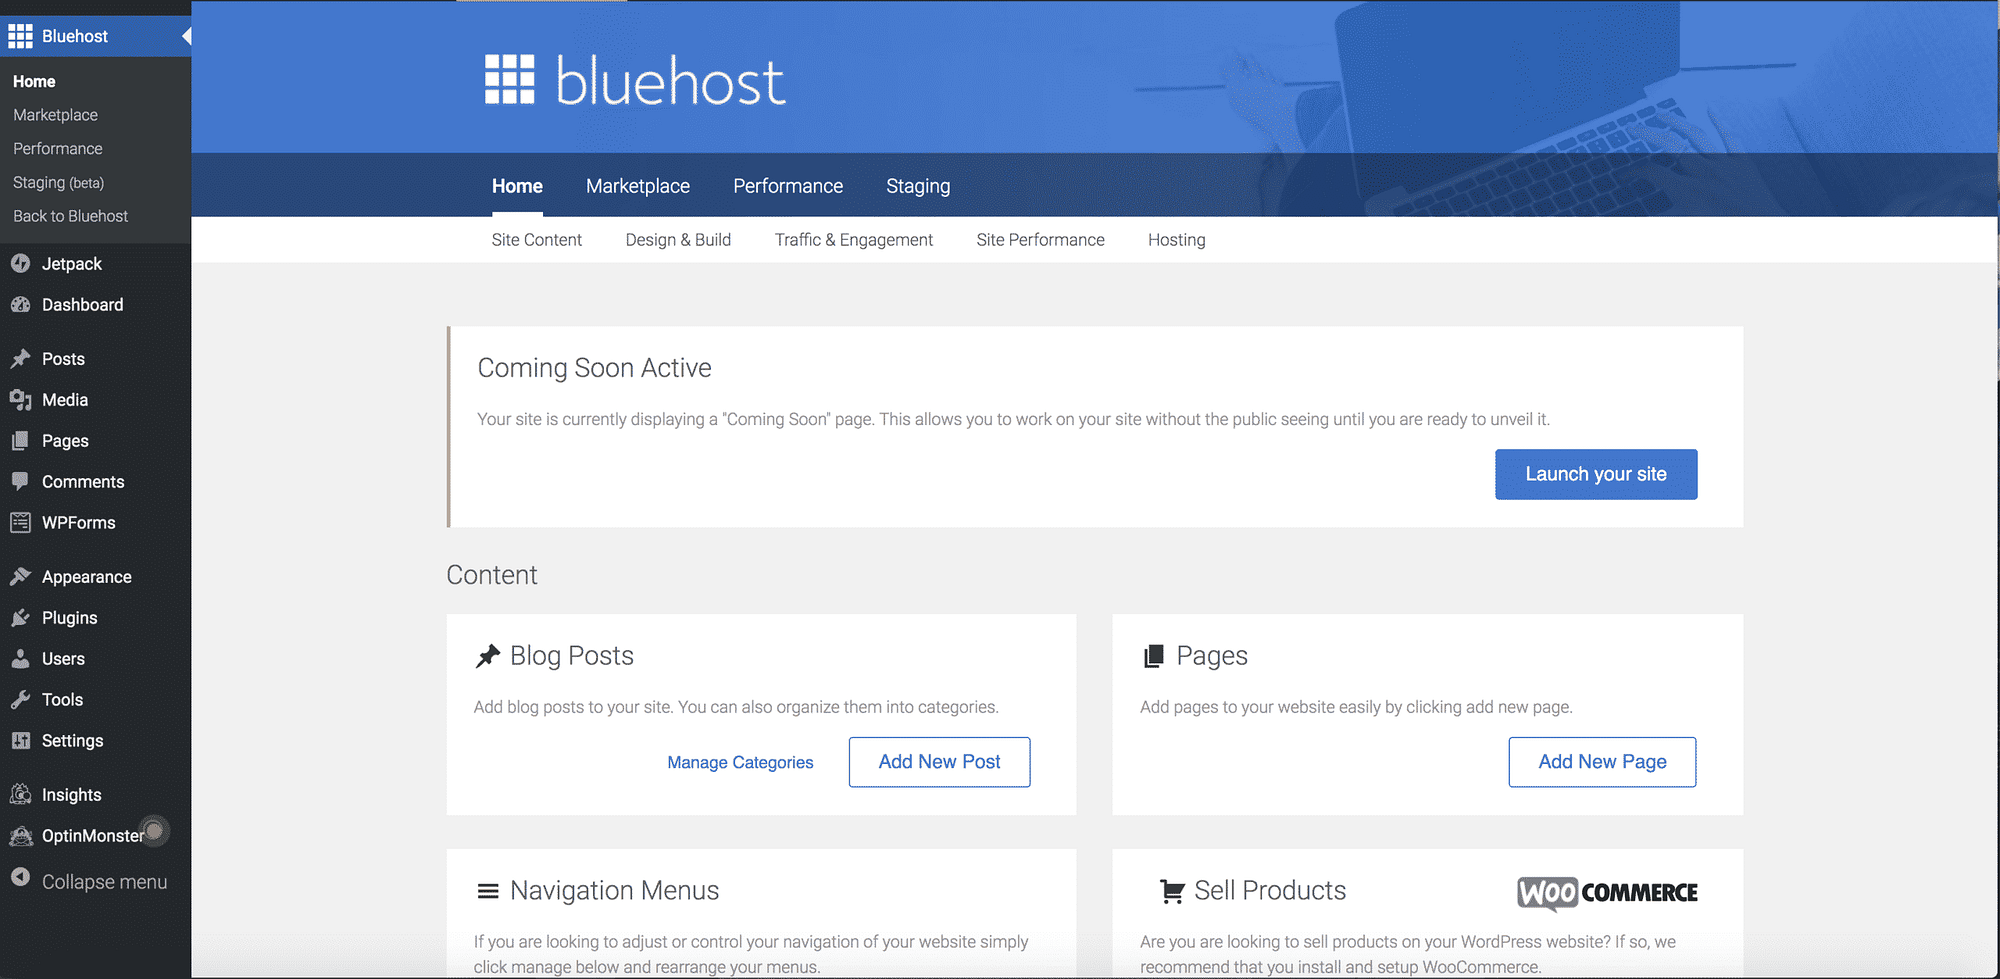 How to start a wordpress blog with bluehost image